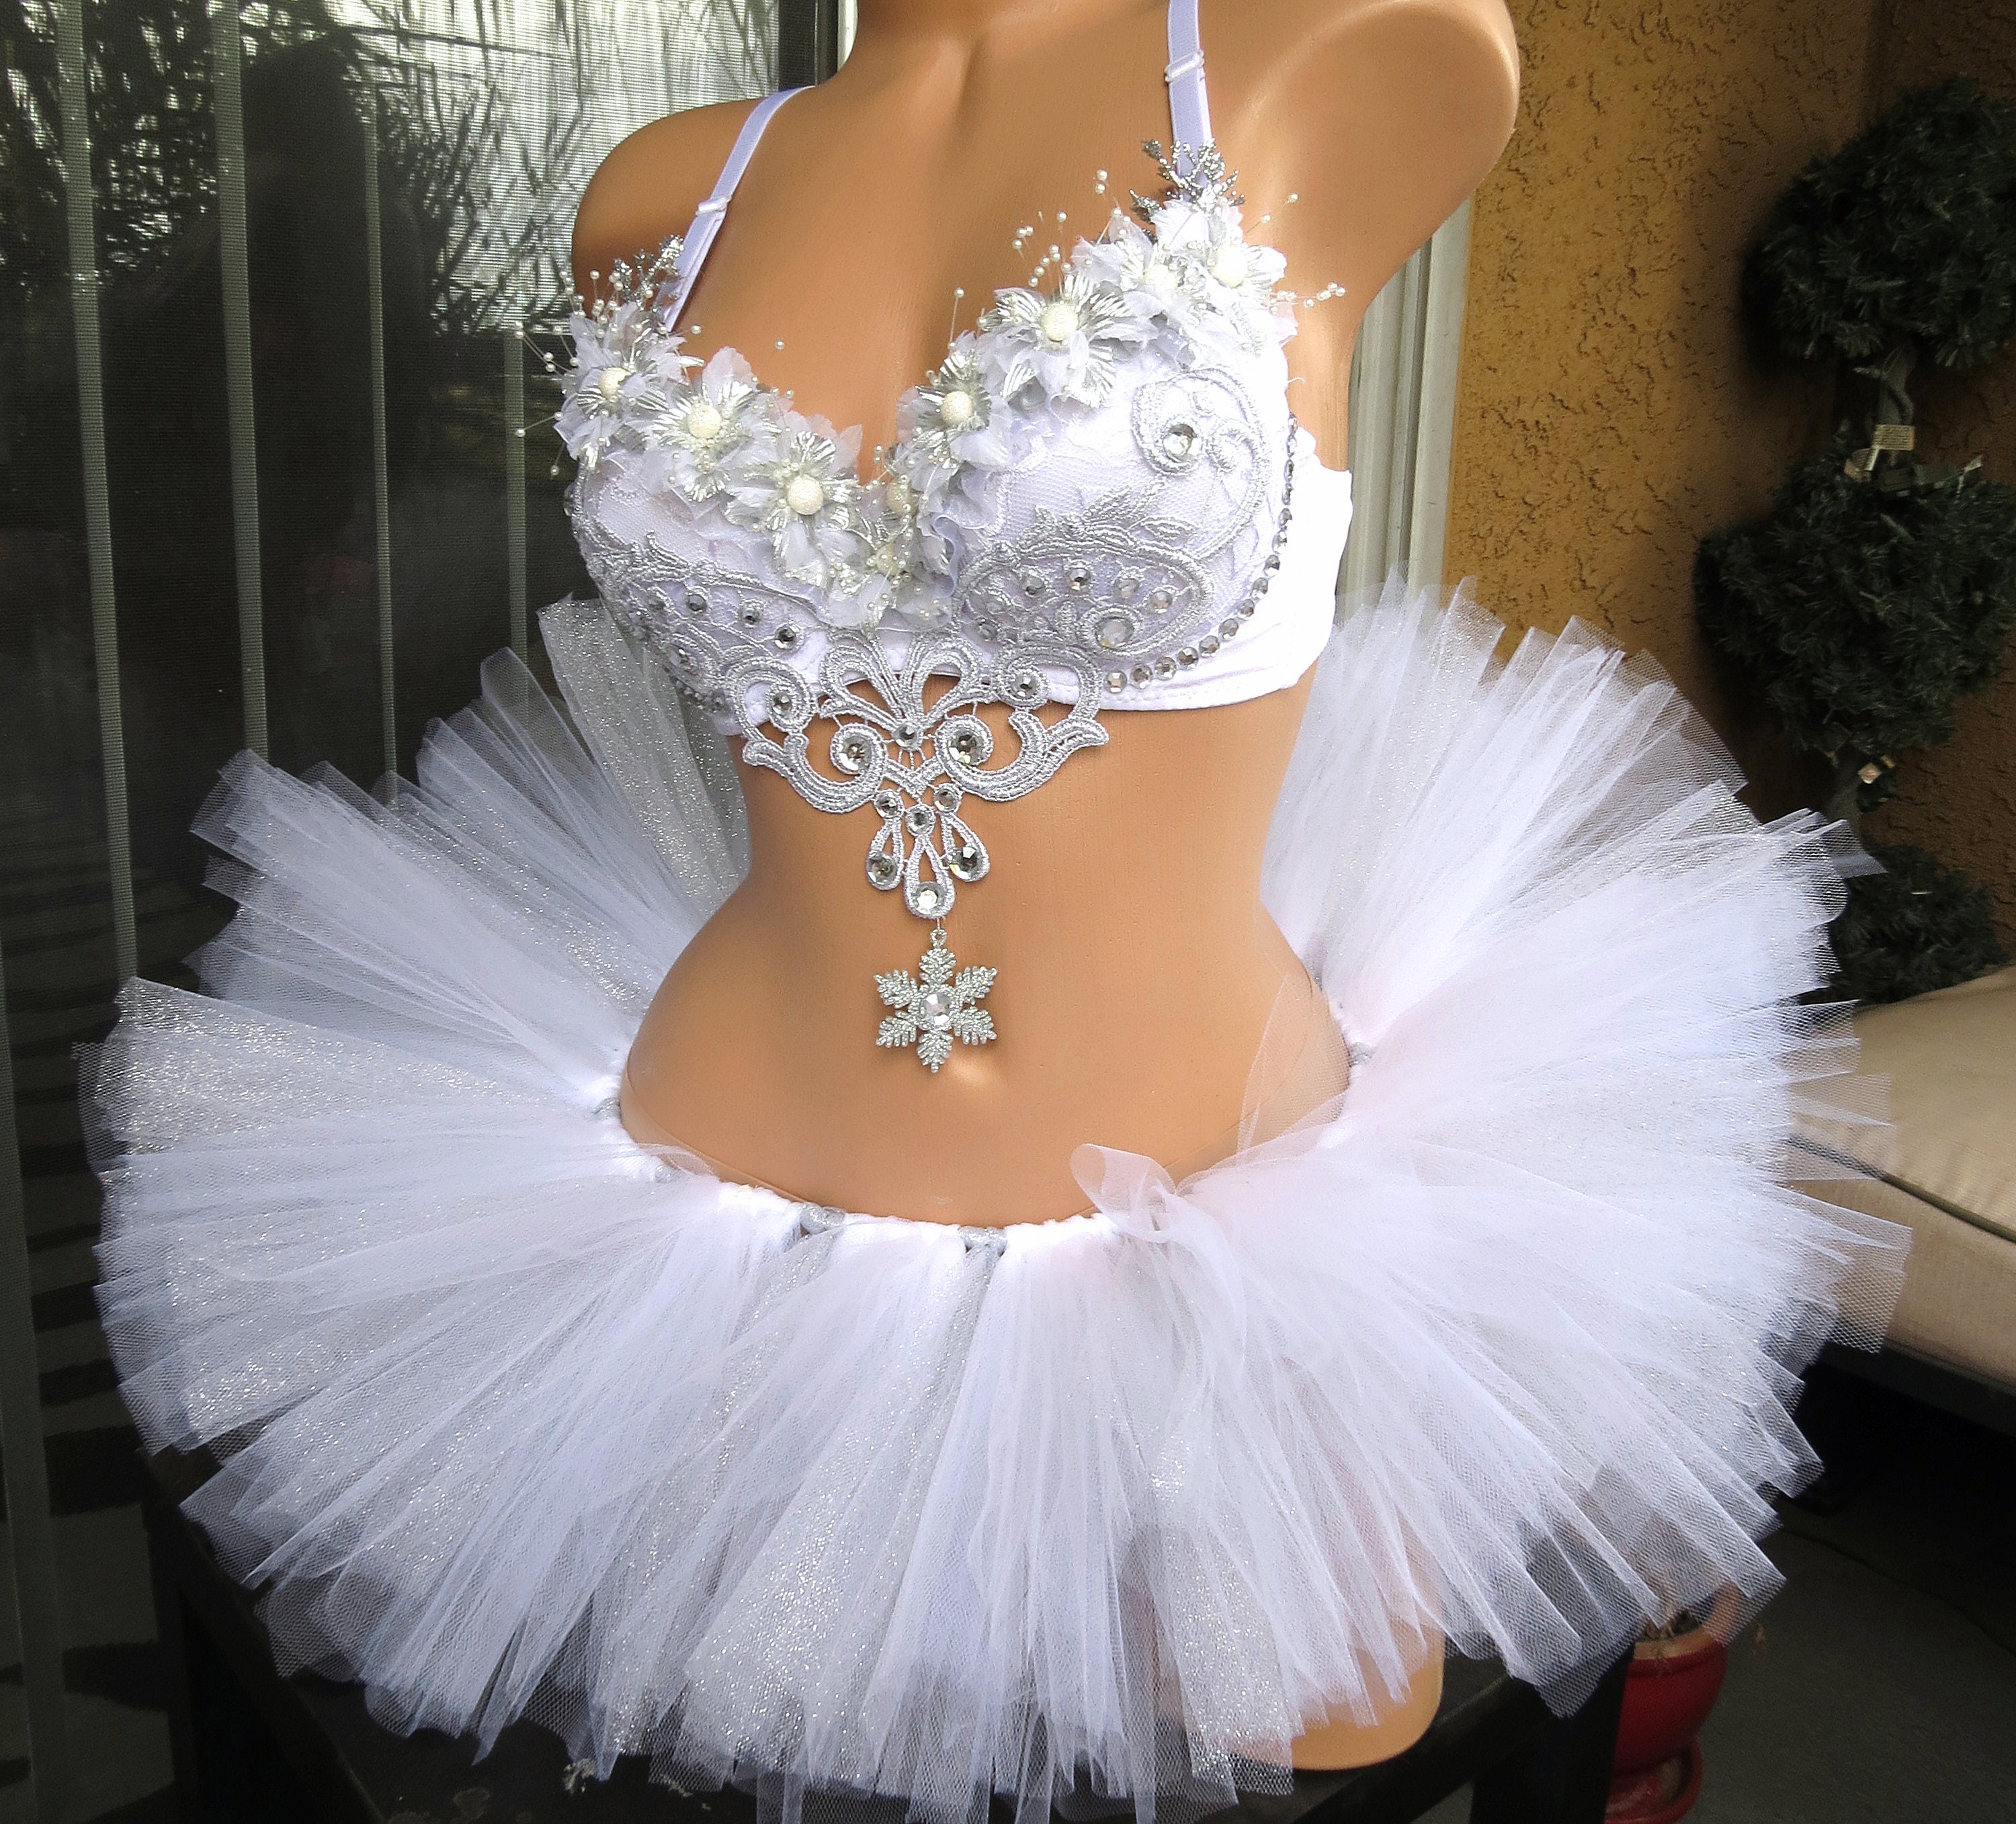 Winter Wonderland Rave Outfit, Bra and Tutu, Ice Queen, Snow Angel, EDC  Outfit, Festival Bride Outfit 